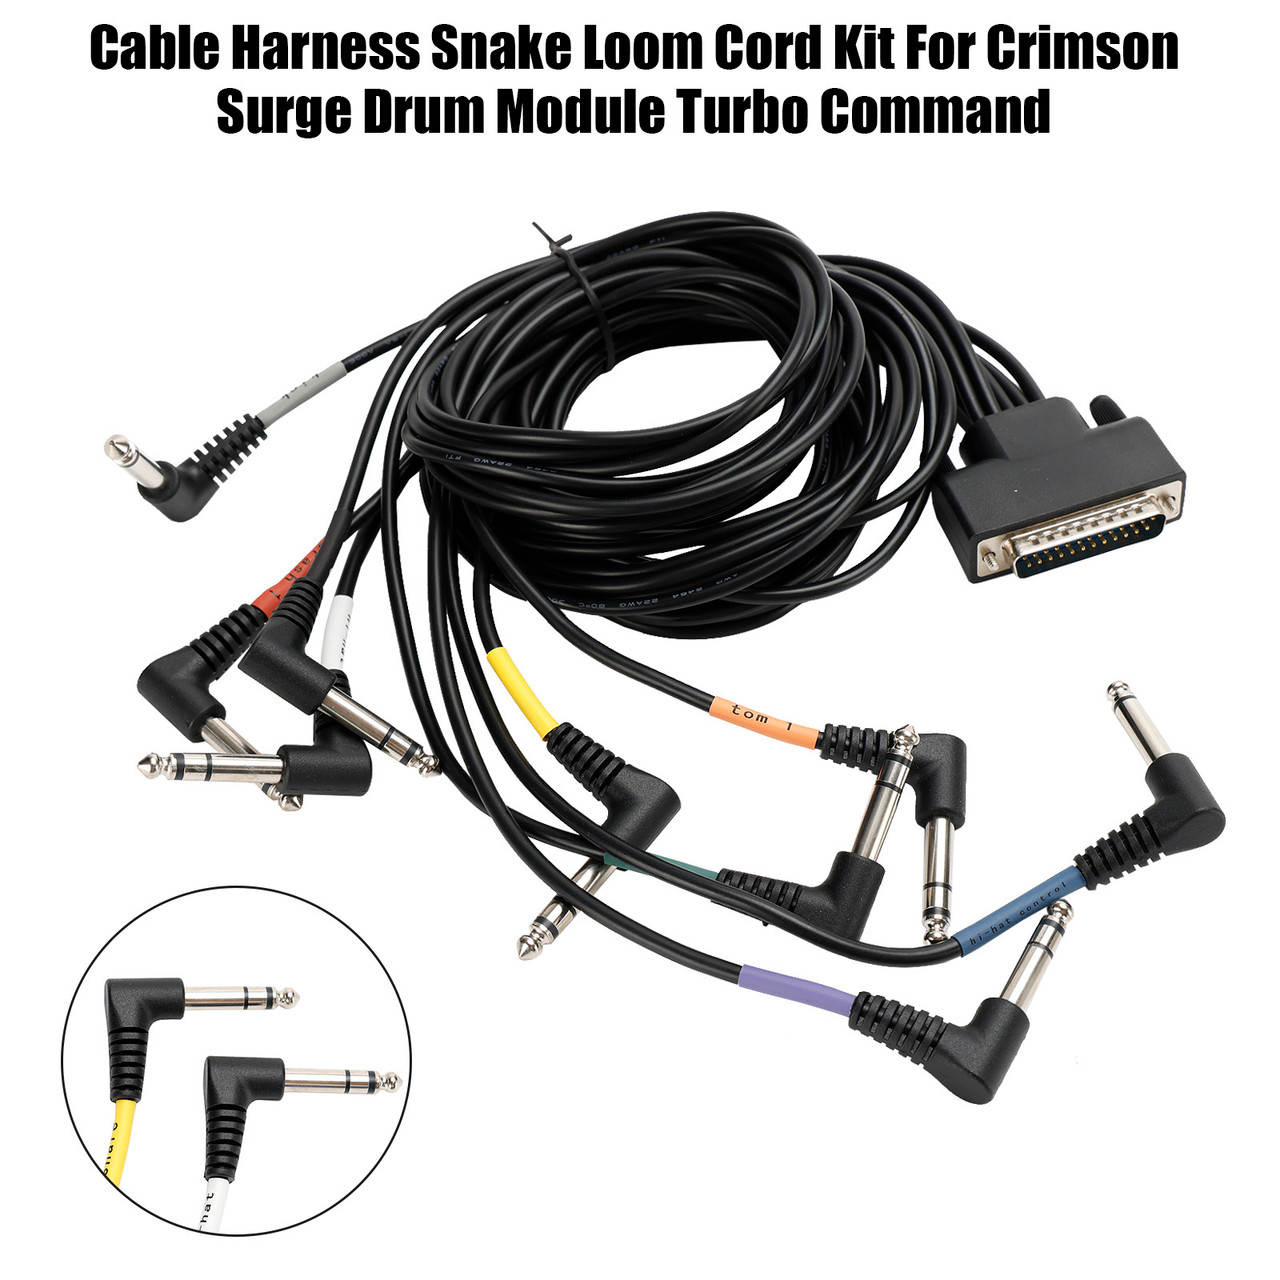 Cable Harness Snake Loom Cord Kit For Crimson Surge Drum Module Turbo Command